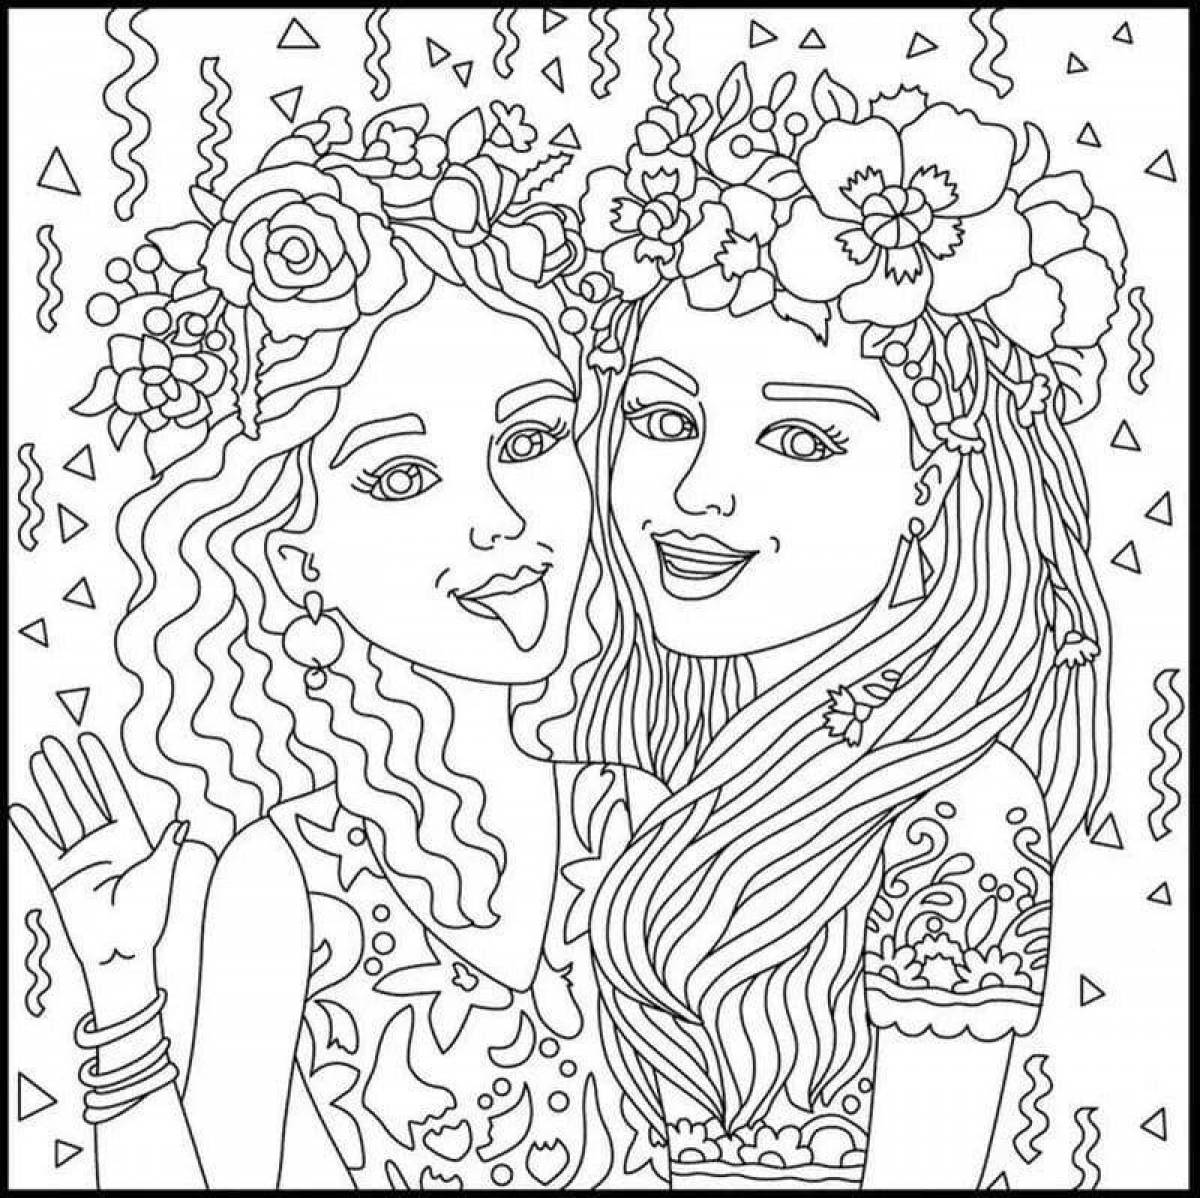 Coloring book best friends in ecstasy